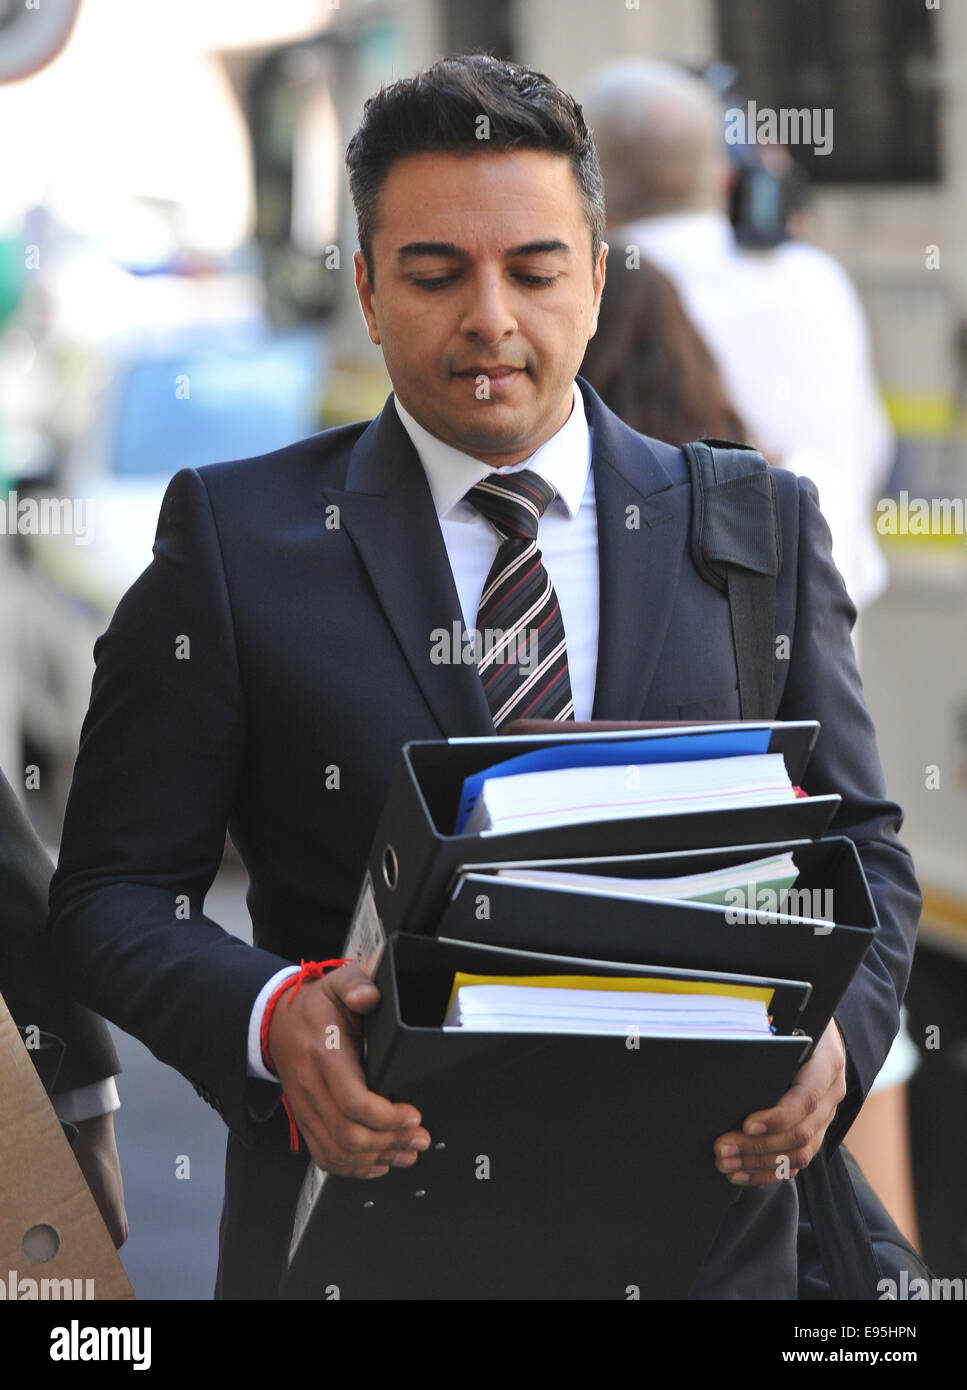 Cape Town, South Africa. 20th October, 2014. Preyen Dewani, brother of Shrien Dewani, arrives at court during Day 6 of the Shrien Dewani trial at the Western Cape High Court before Judge Jeanette Traverso. Dewani is caused of hiring hit men to murder his wife, Anni. Anni Ninna Dewani (née Hindocha; 12 March 1982 – 13 November 2010) was a Swedish woman who, while on her honeymoon in South Africa, was kidnapped and then murdered in Gugulethu township near Cape Town on 13 November 2010. Credit:  Roger Sedres/Alamy Live News Stock Photo